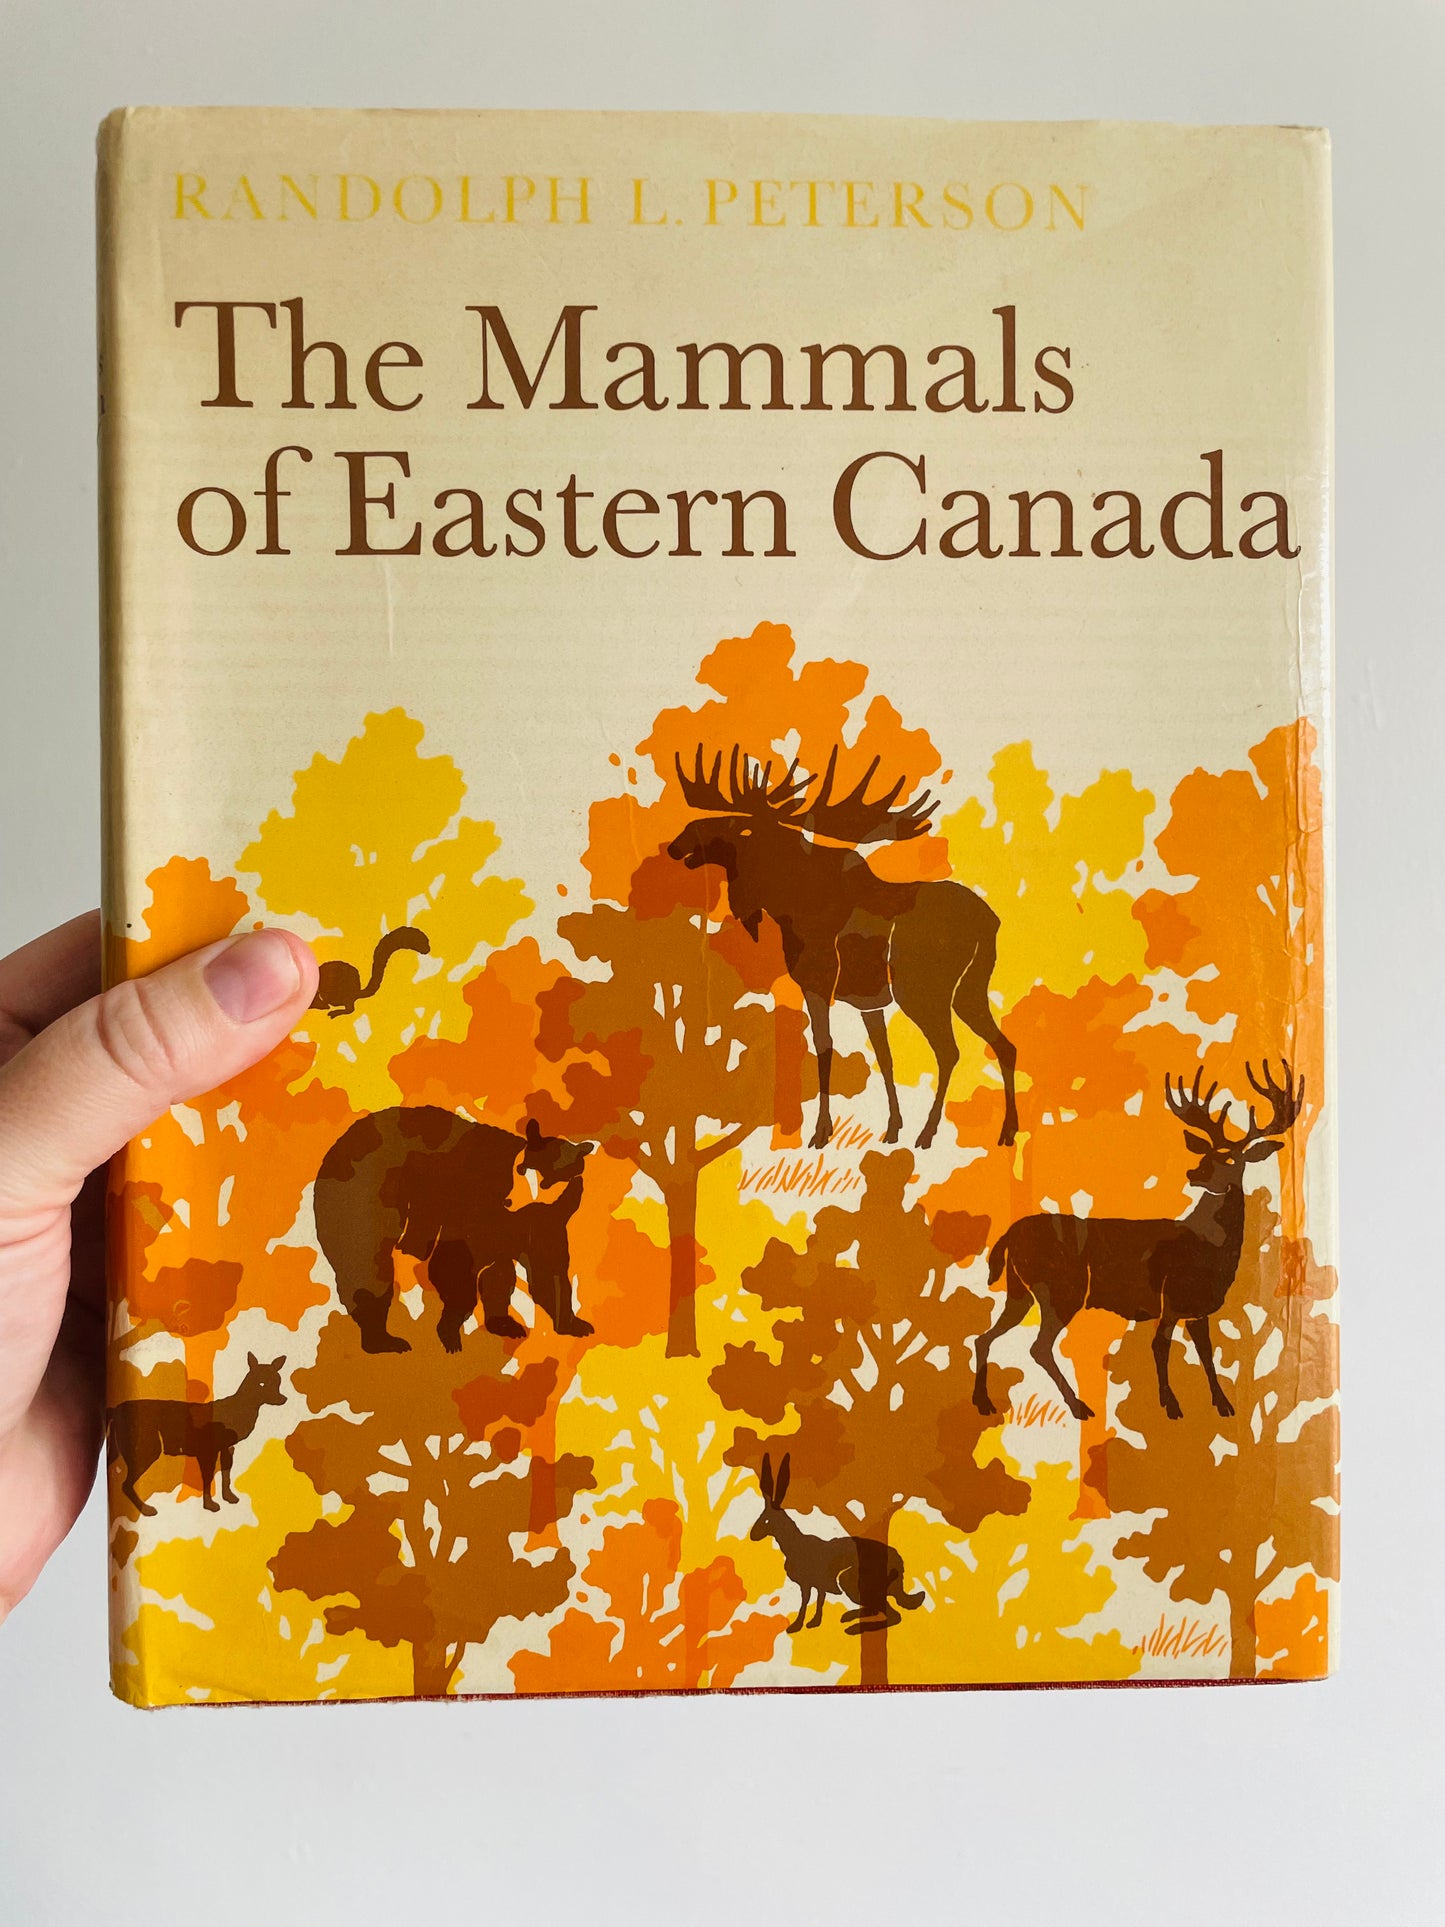 The Mammals of Eastern Canada Large Clothbound Hardcover Book by Randolph L. Peterson (1966)